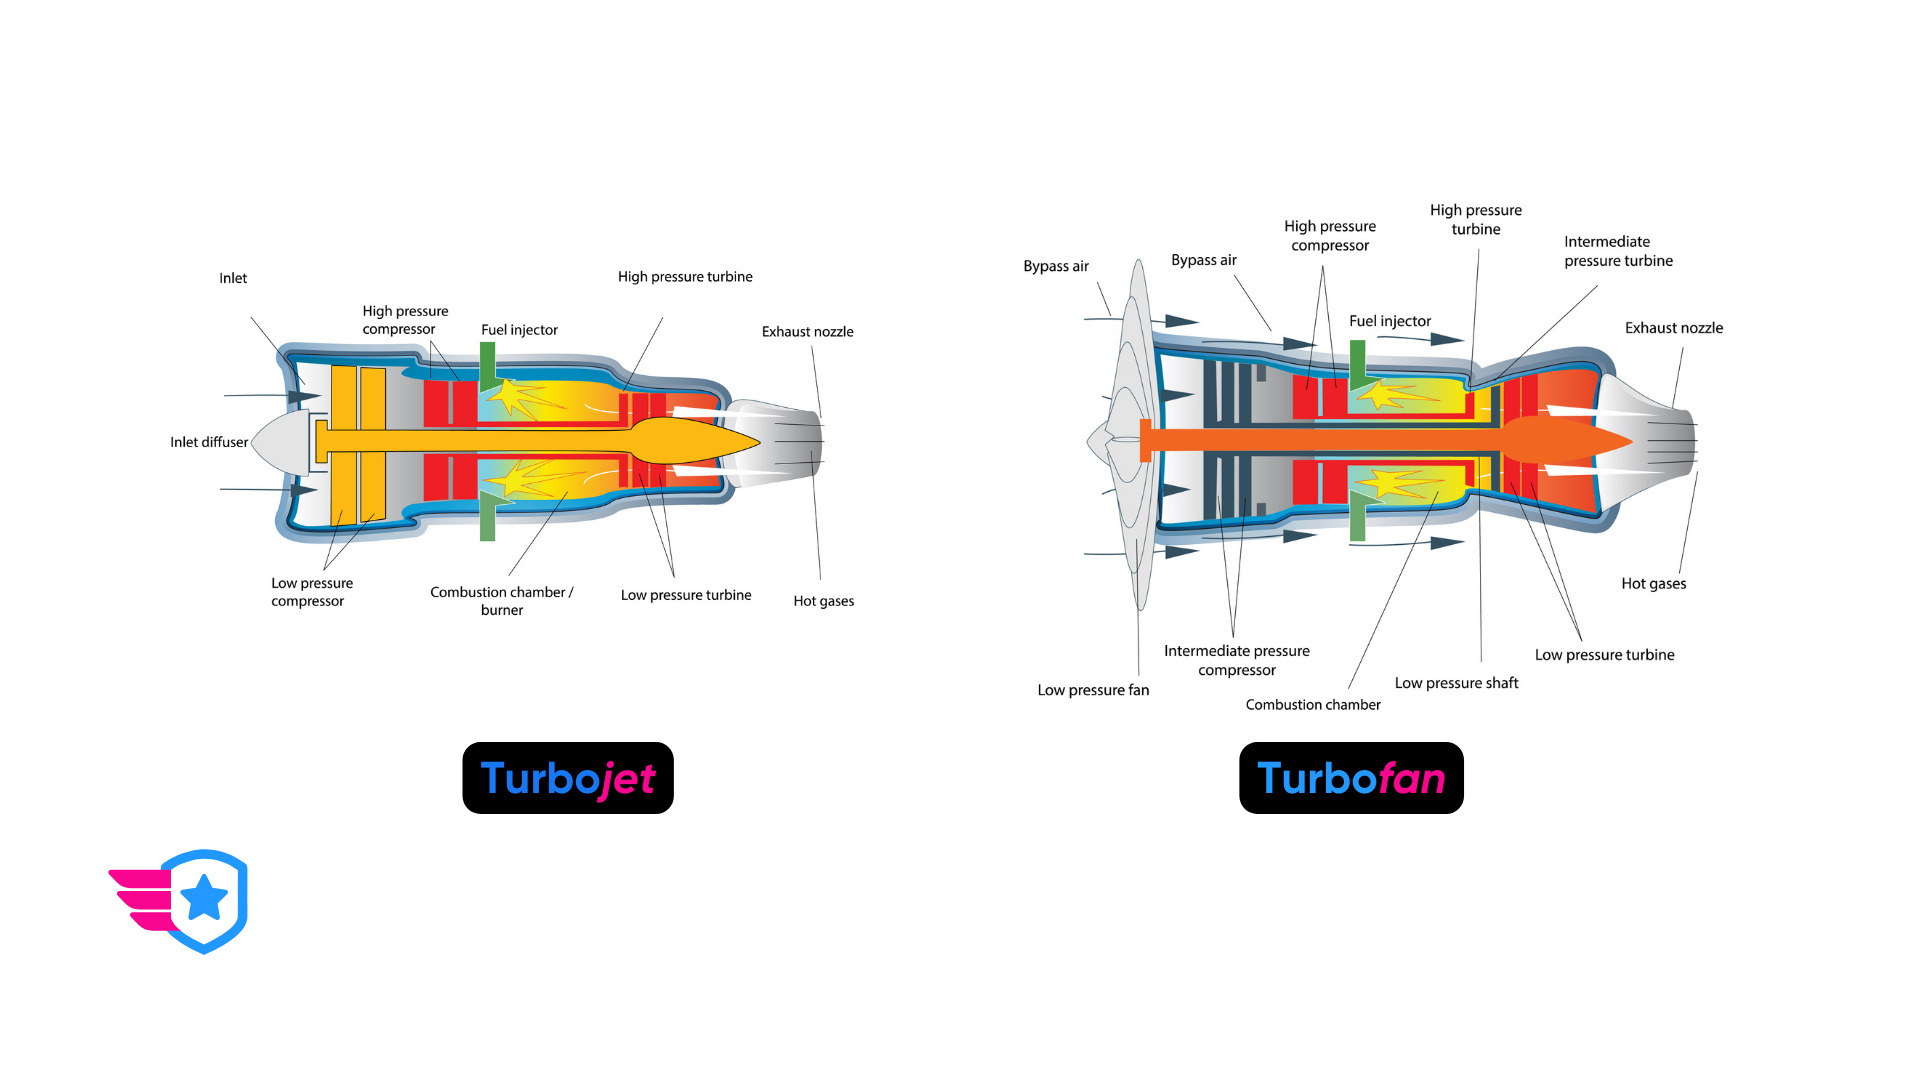 Turbofan vs. Turbojet: What’s the Difference?